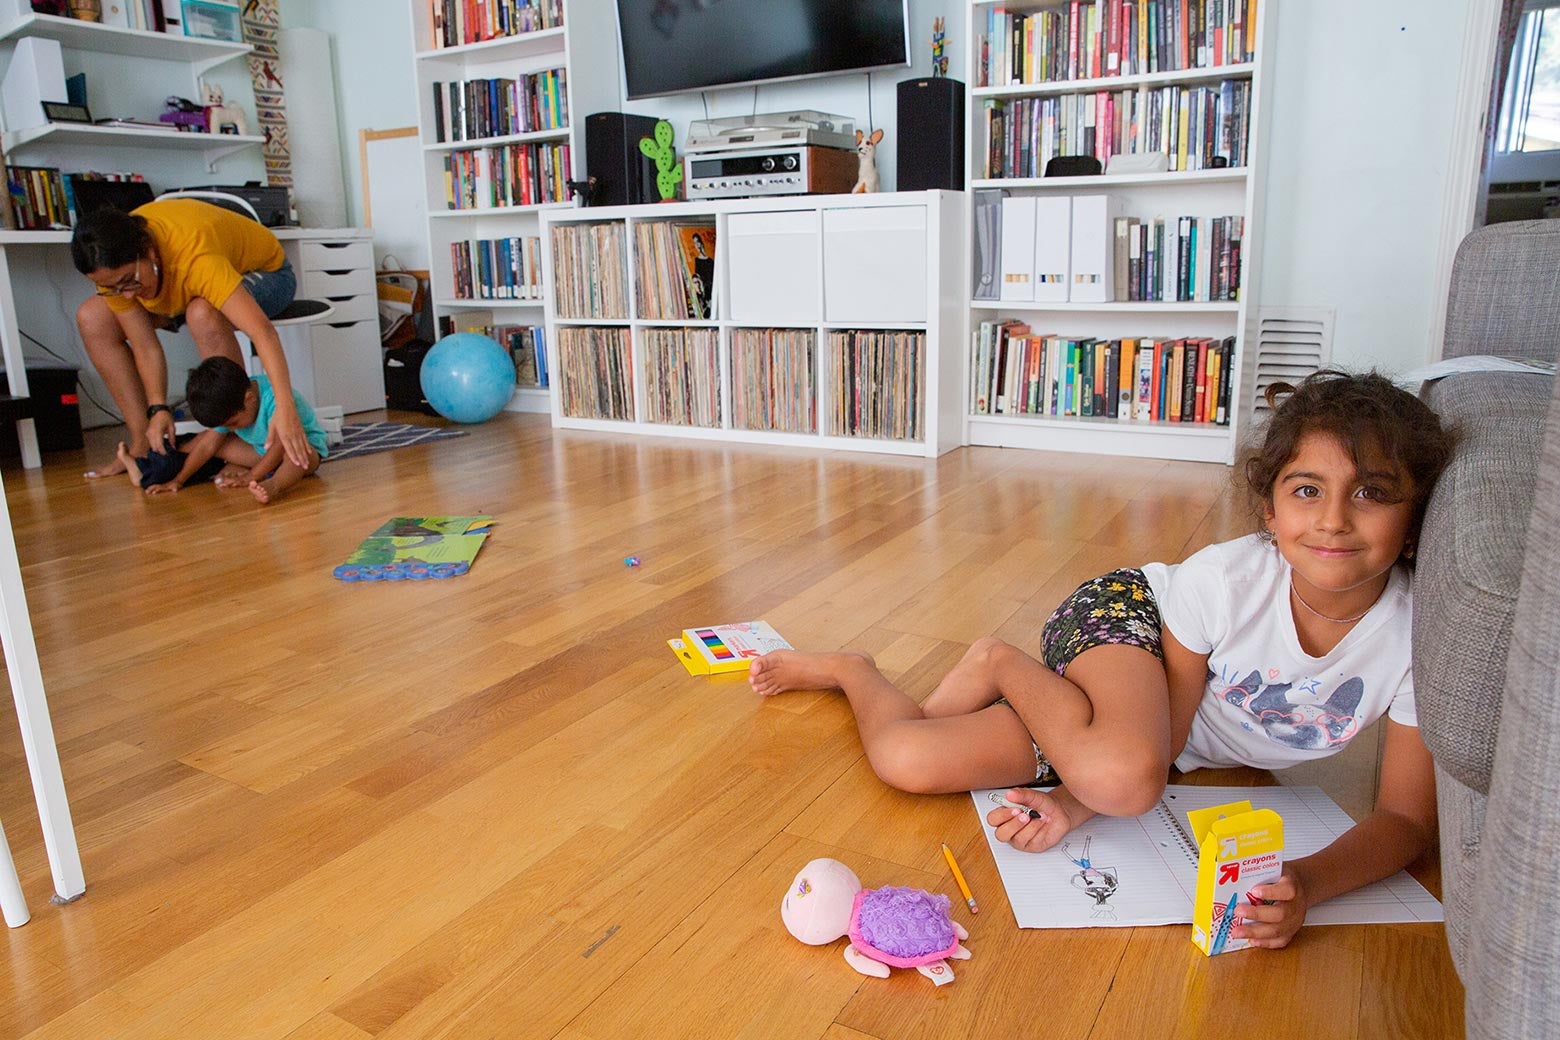 A little girl sitting on the ground with her art supplies smiles at the camera. On the other side of the room, her mother reaches down to her son, who's sitting on the floor. In the background are bookshelves and a TV.